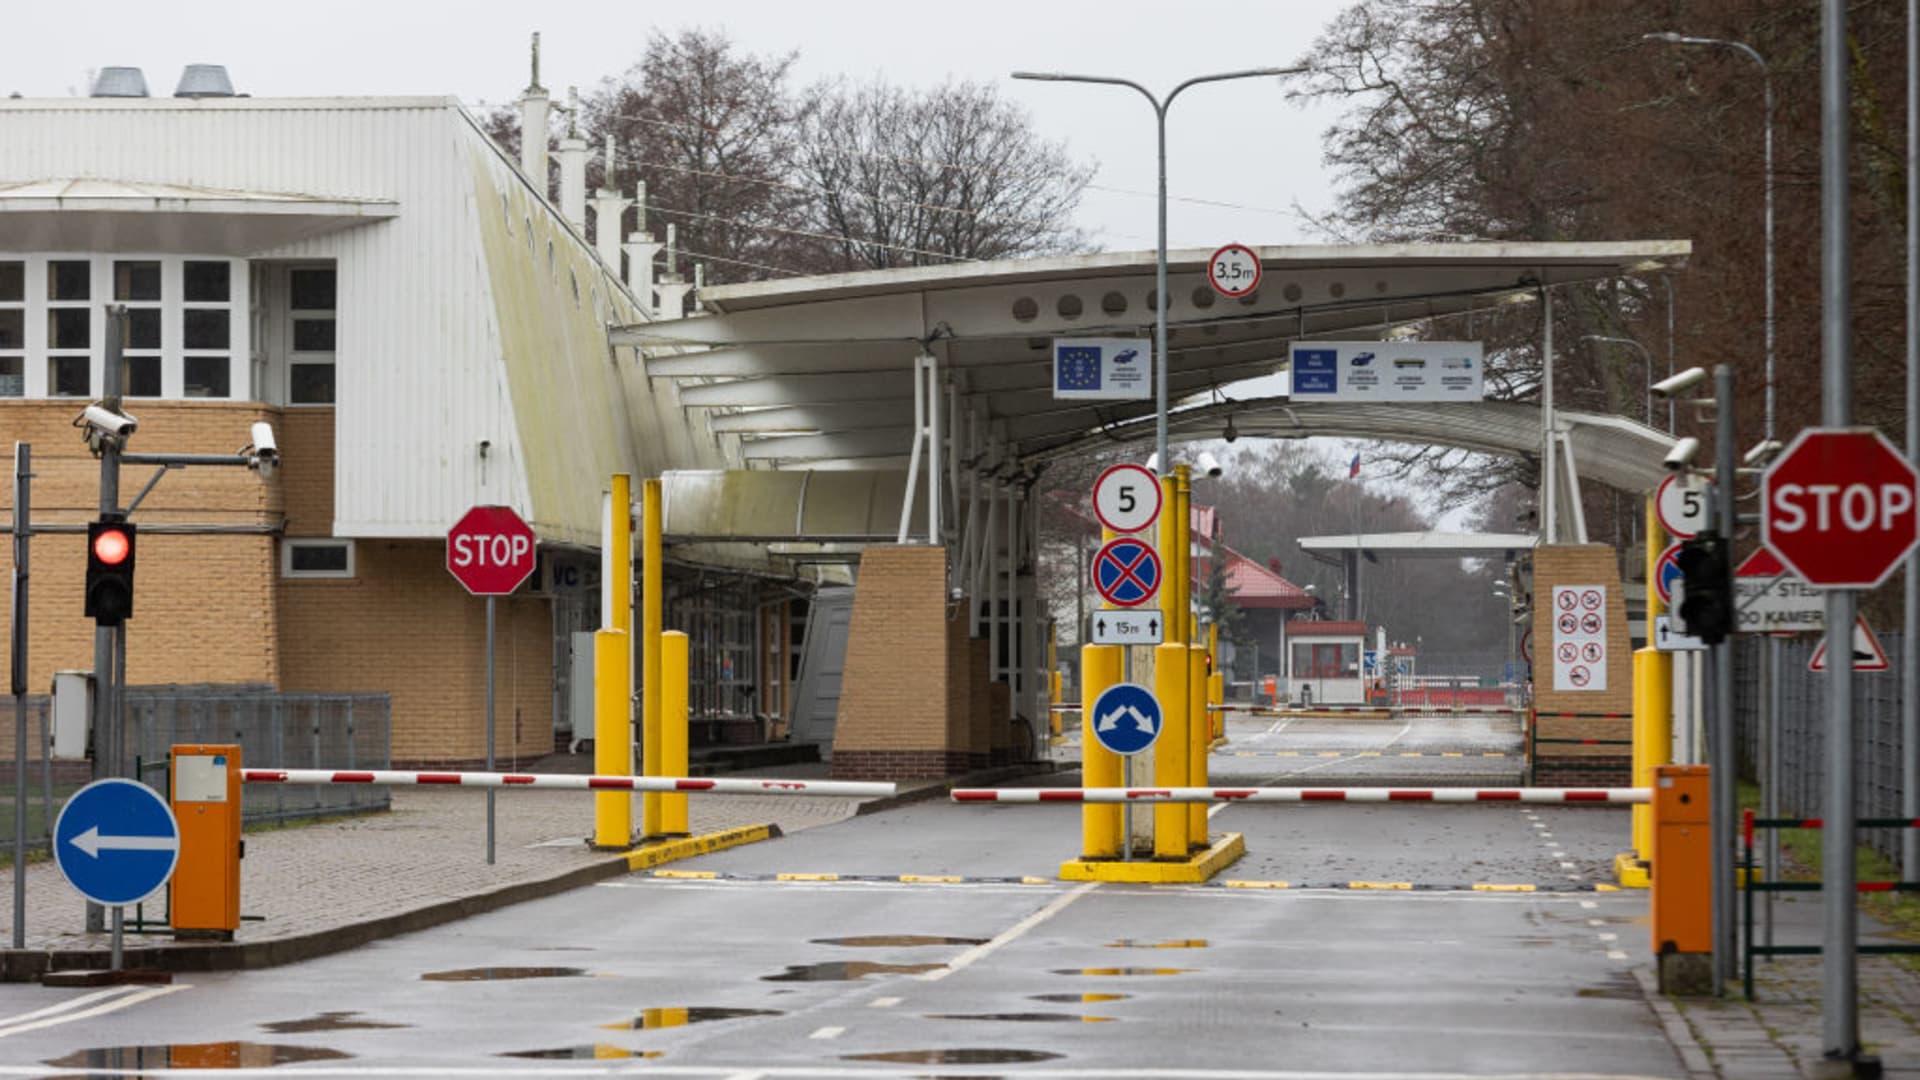 A disused border crossing point to Russia is seen on April 15, 2022 in Nida, Lithuania. Russia's Kaliningrad exclave, on the shore of the Baltic Sea, is sandwiched between NATO members Lithuania and Poland and is the Baltic coasts most strategic transport and trade port.